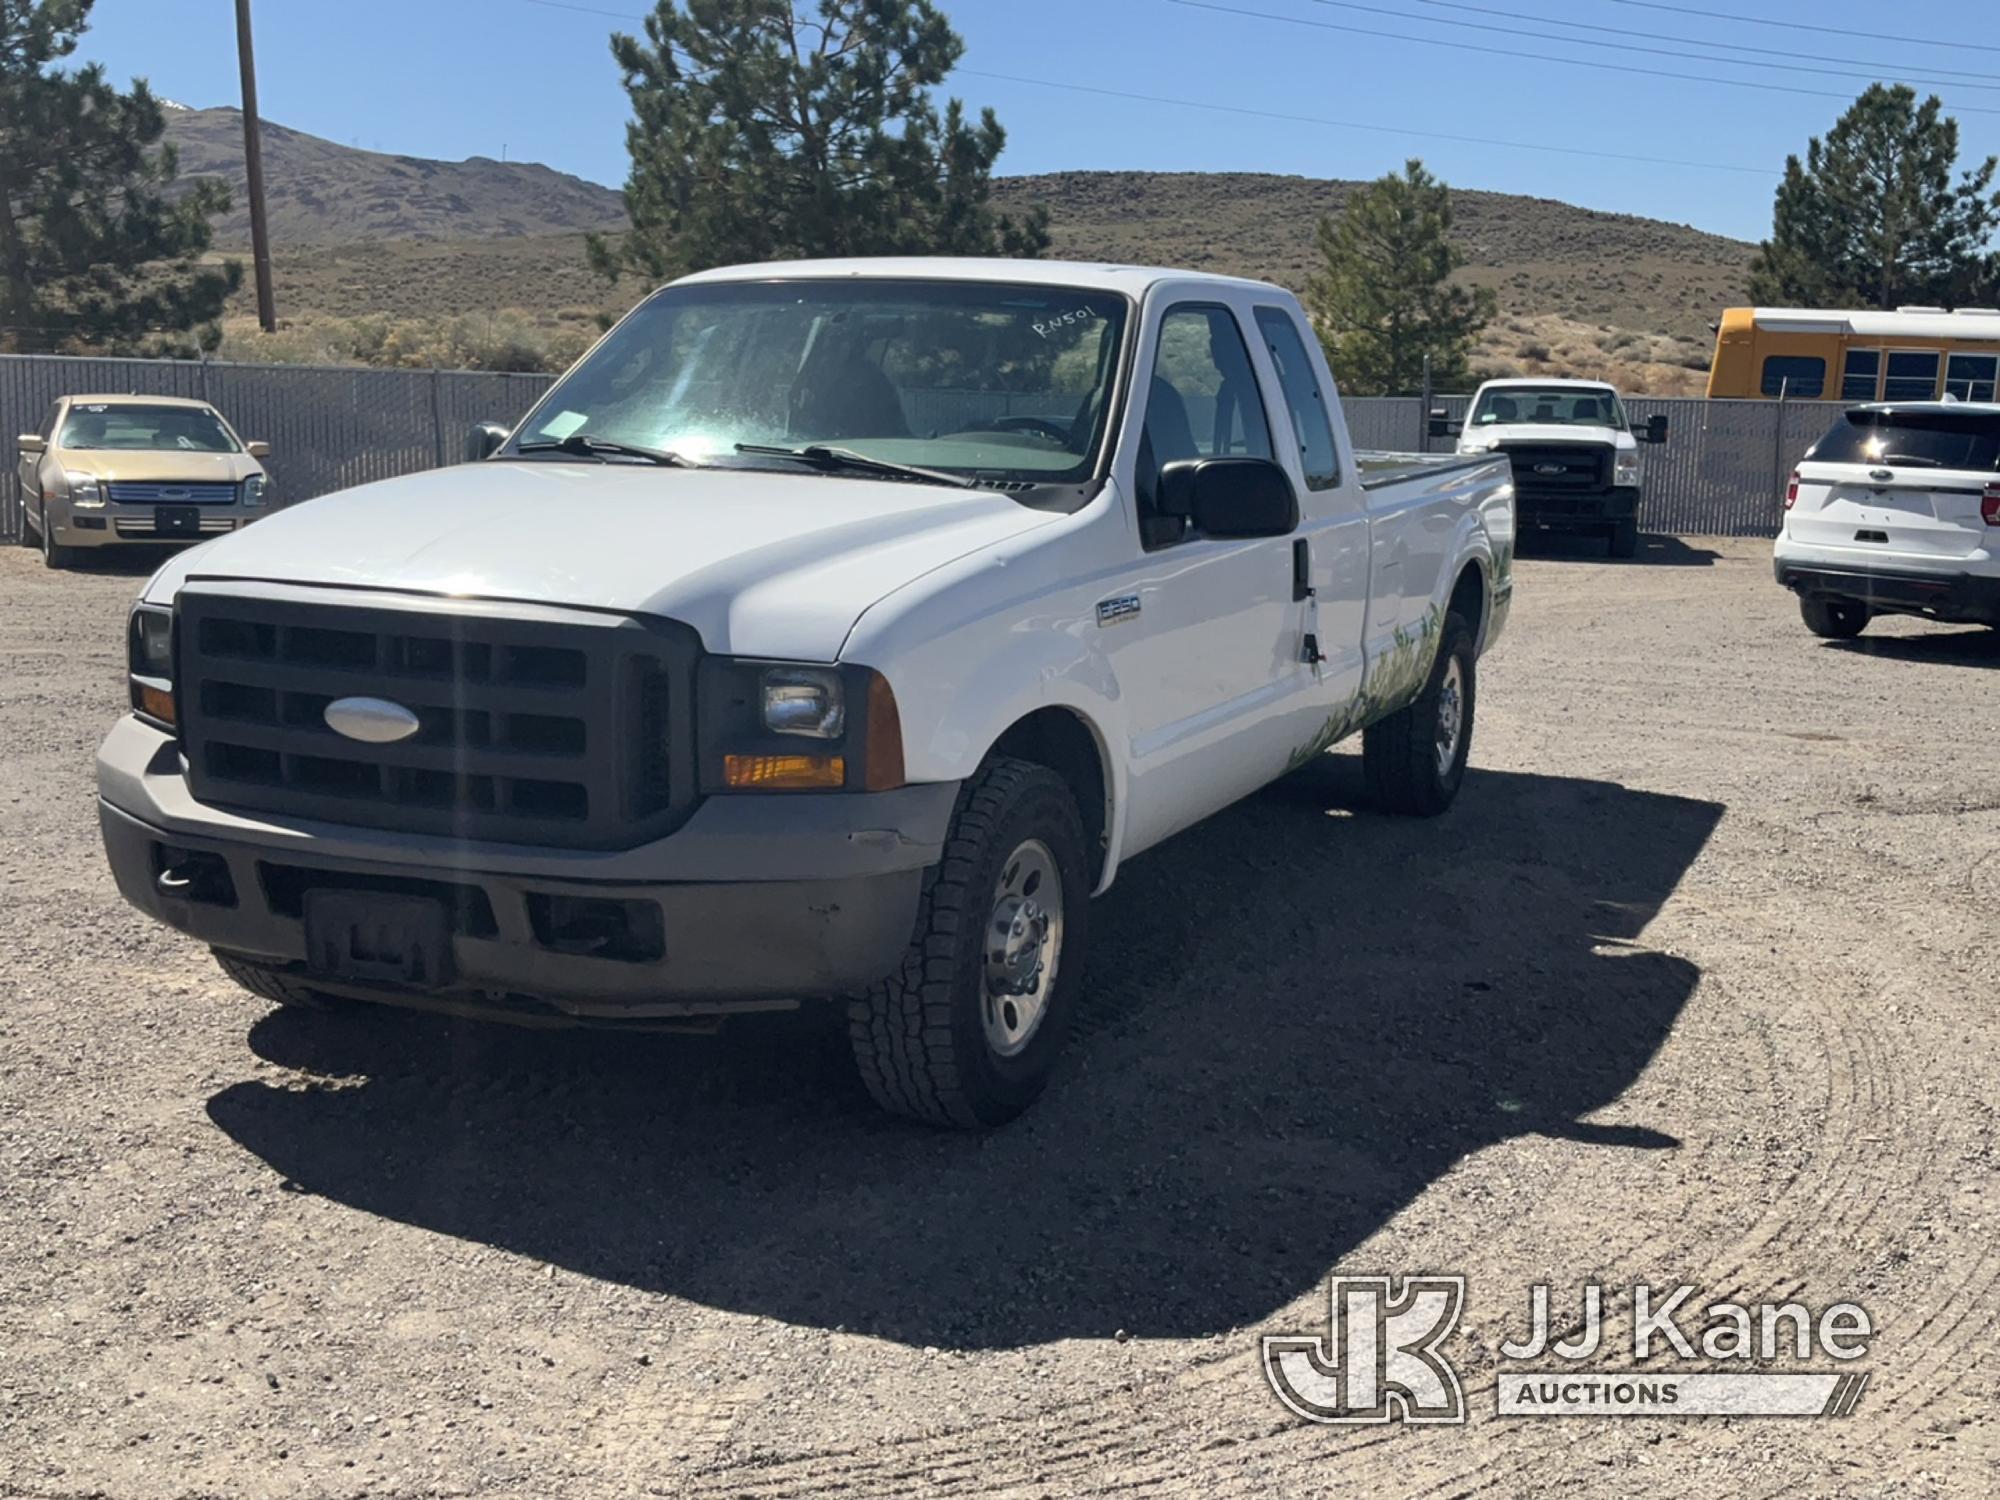 (Tracy-Clark, NV) 2005 Ford F250 Extended-Cab Pickup Truck Runs & Moves) (Minor Body Damage, Cracked